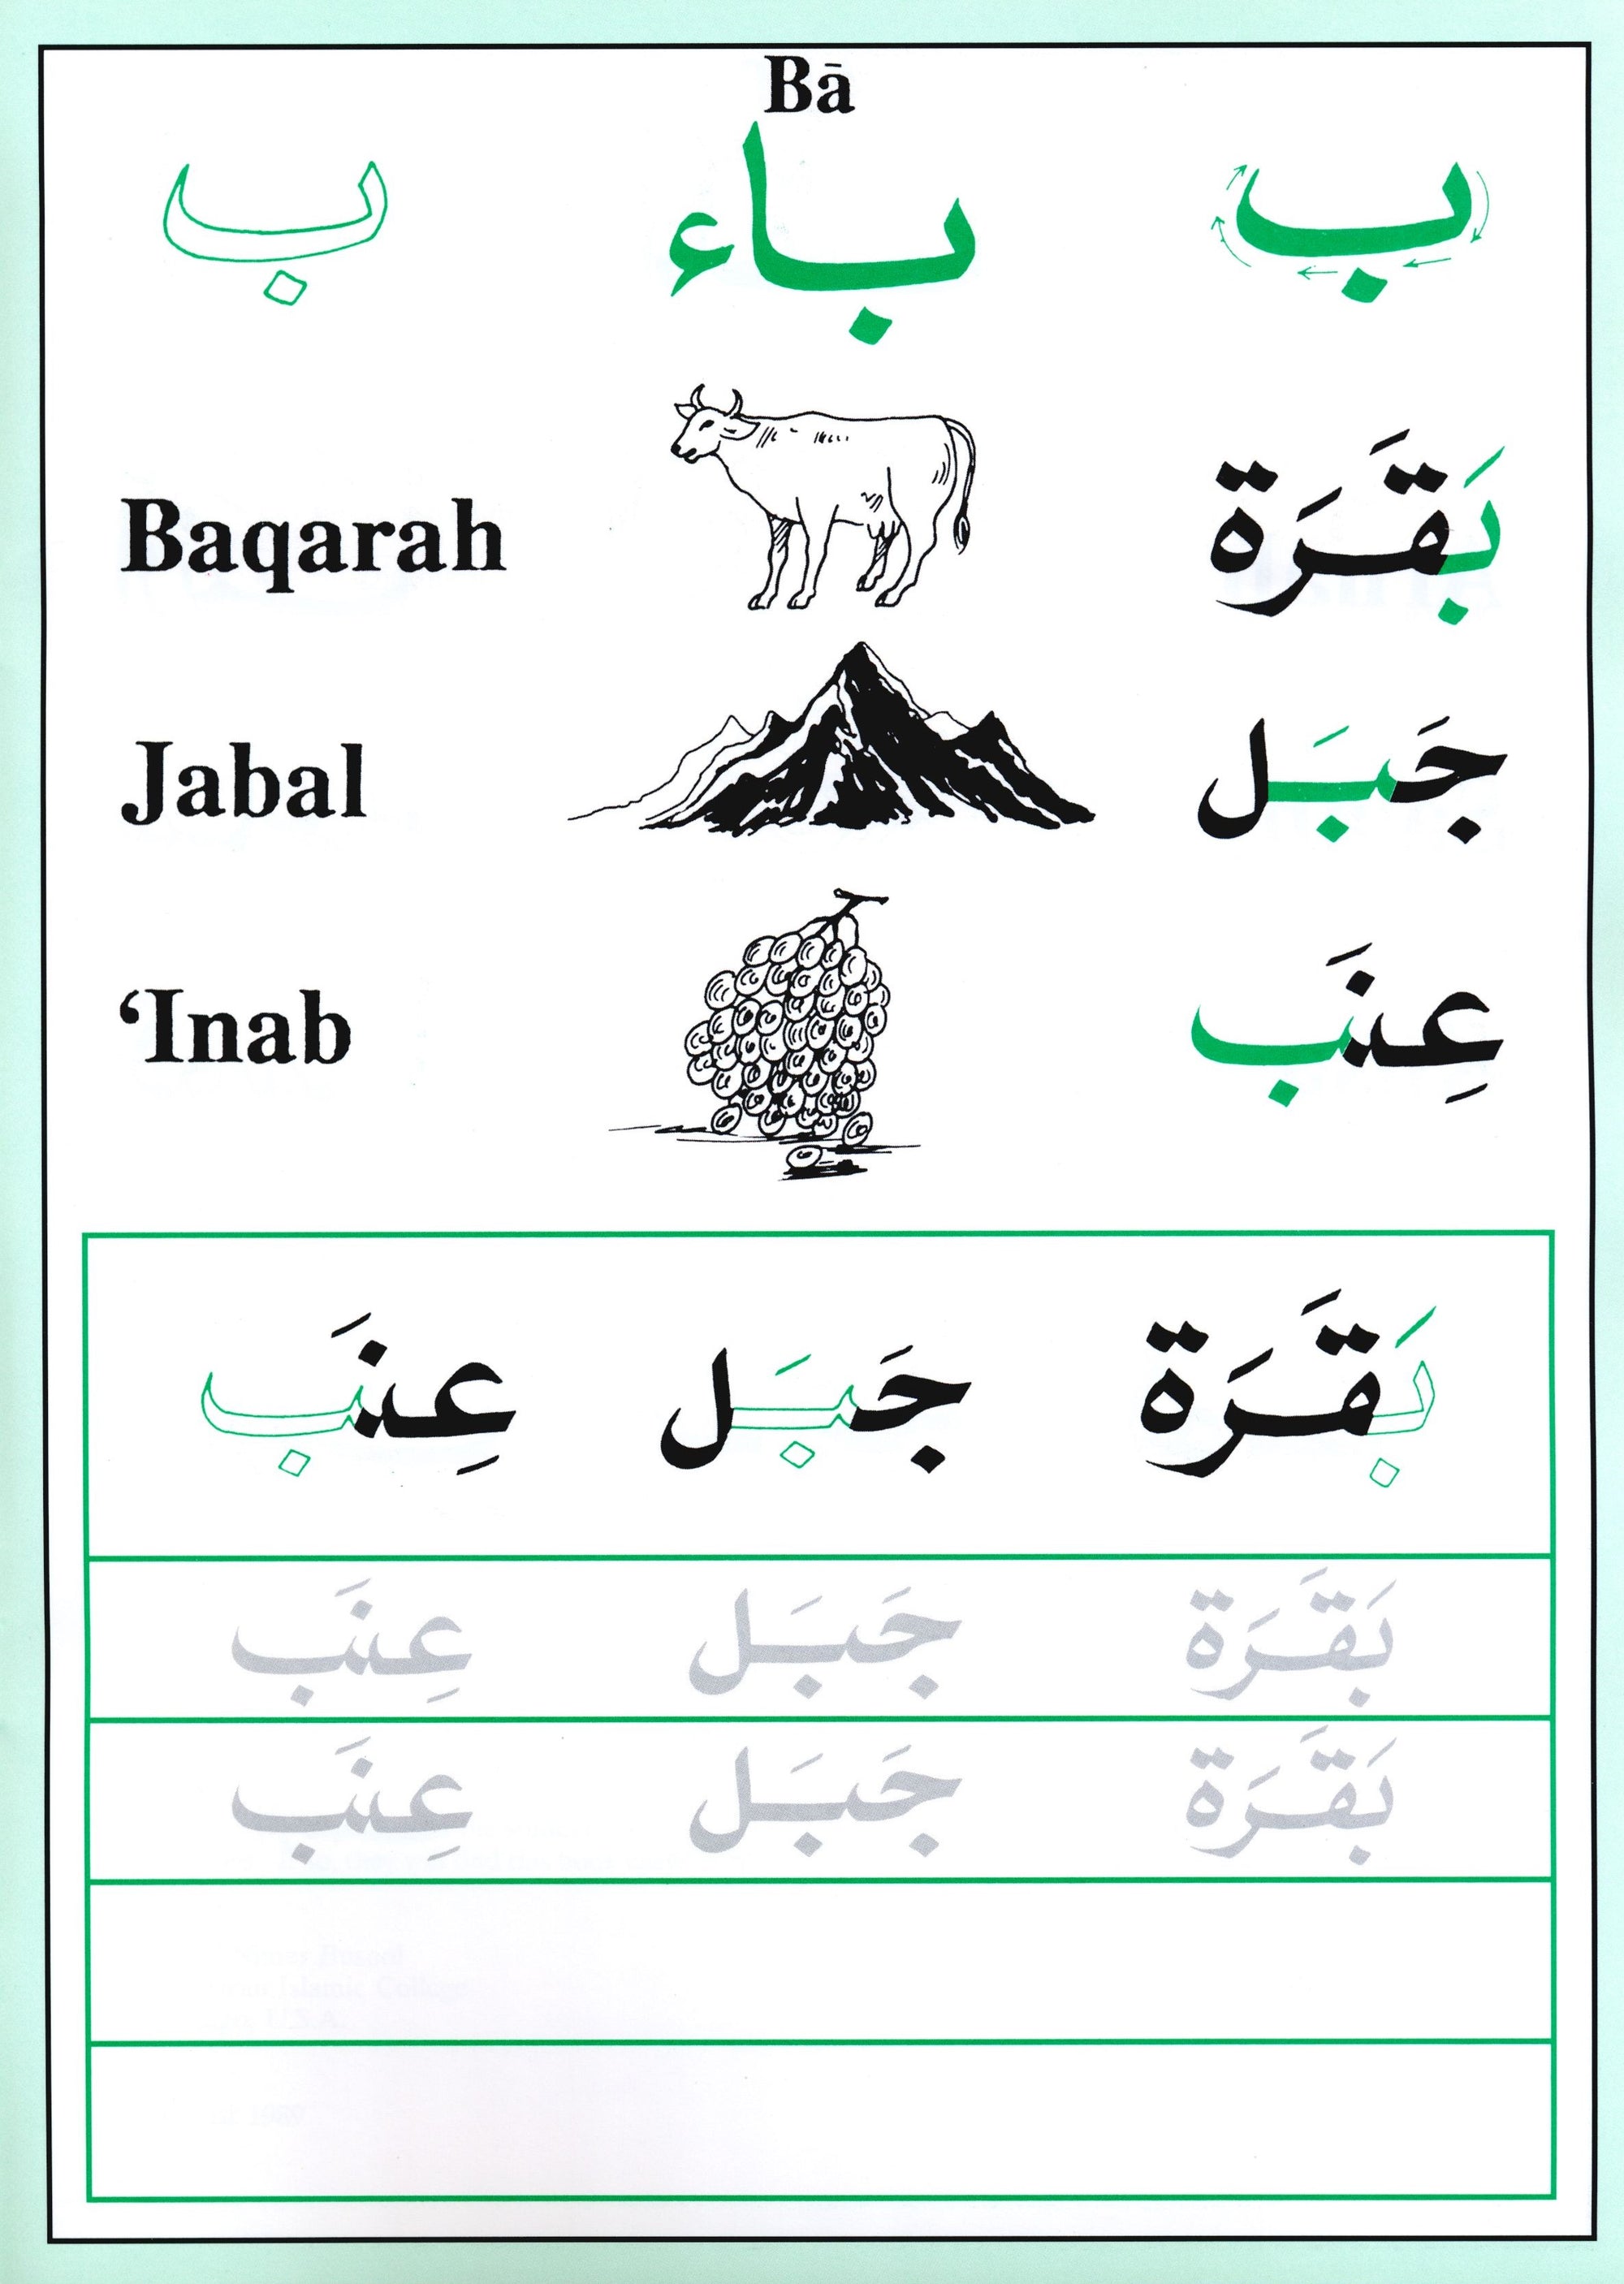 arabic letters with english translation